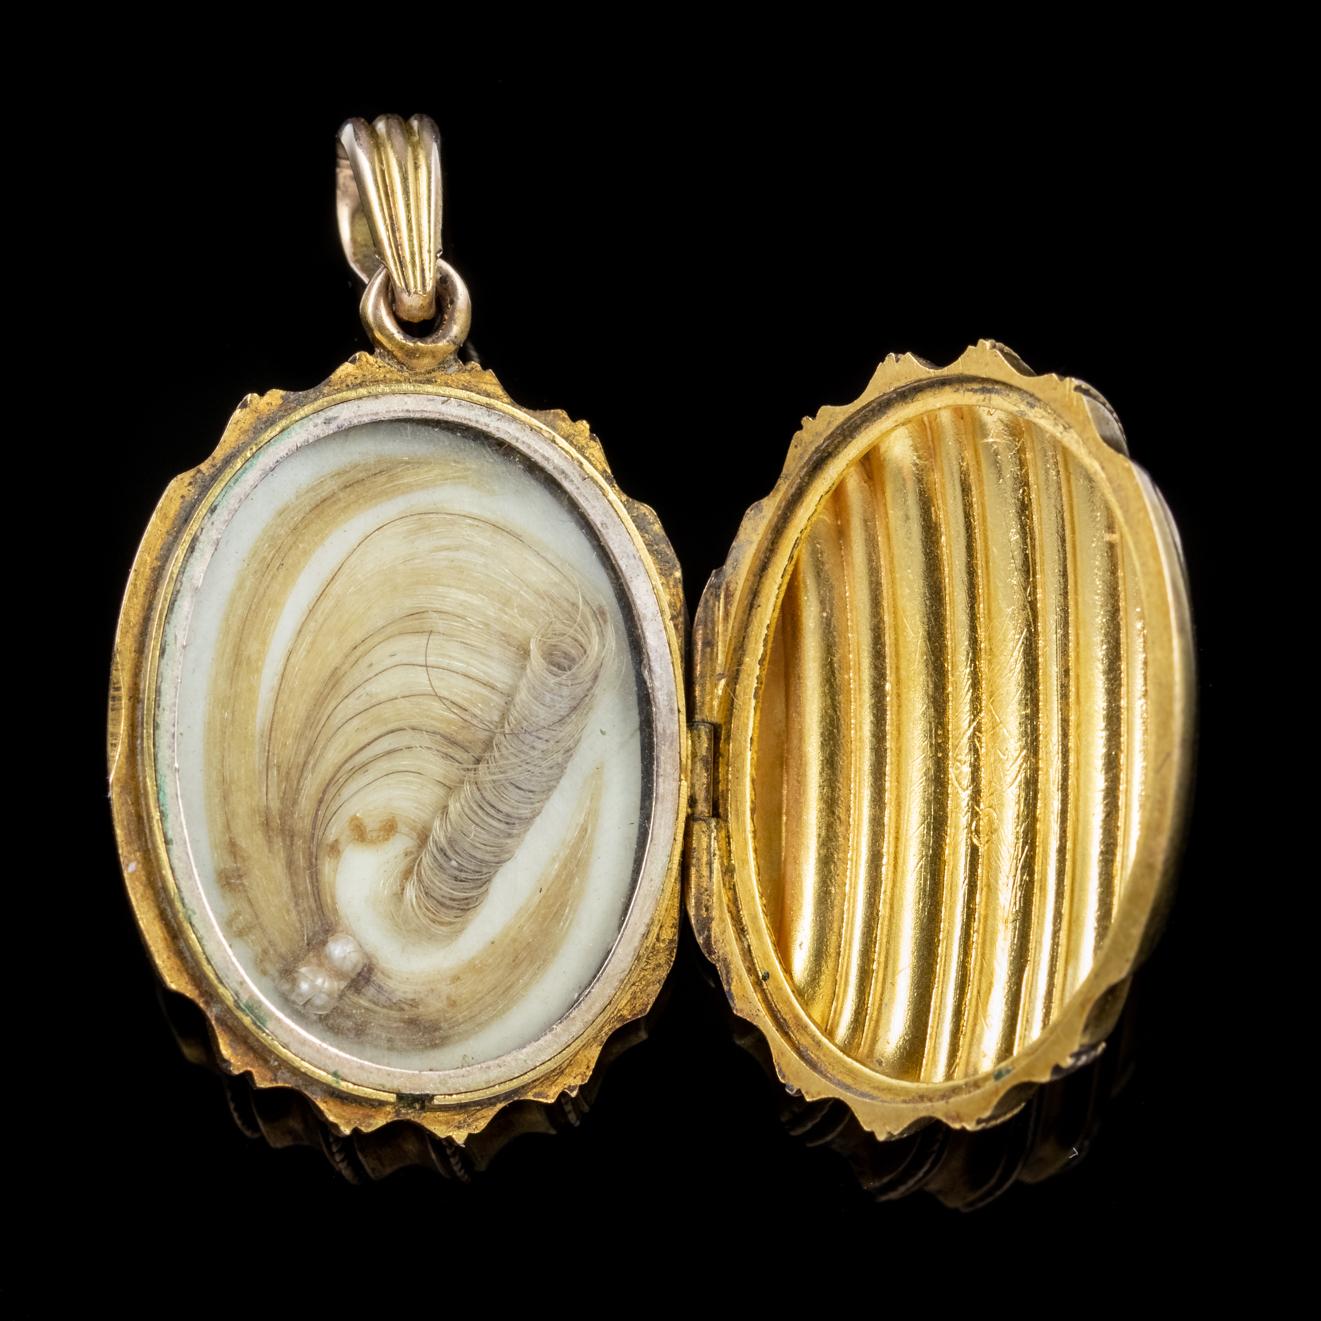 A splendid antique Victorian Mourning locket modelled in 15ct Yellow Gold with a wonderful ribbed surface on both sides. 

The piece opens up to reveal a fabulous display of curled hair showcased behind a glass window. It has been beautifully